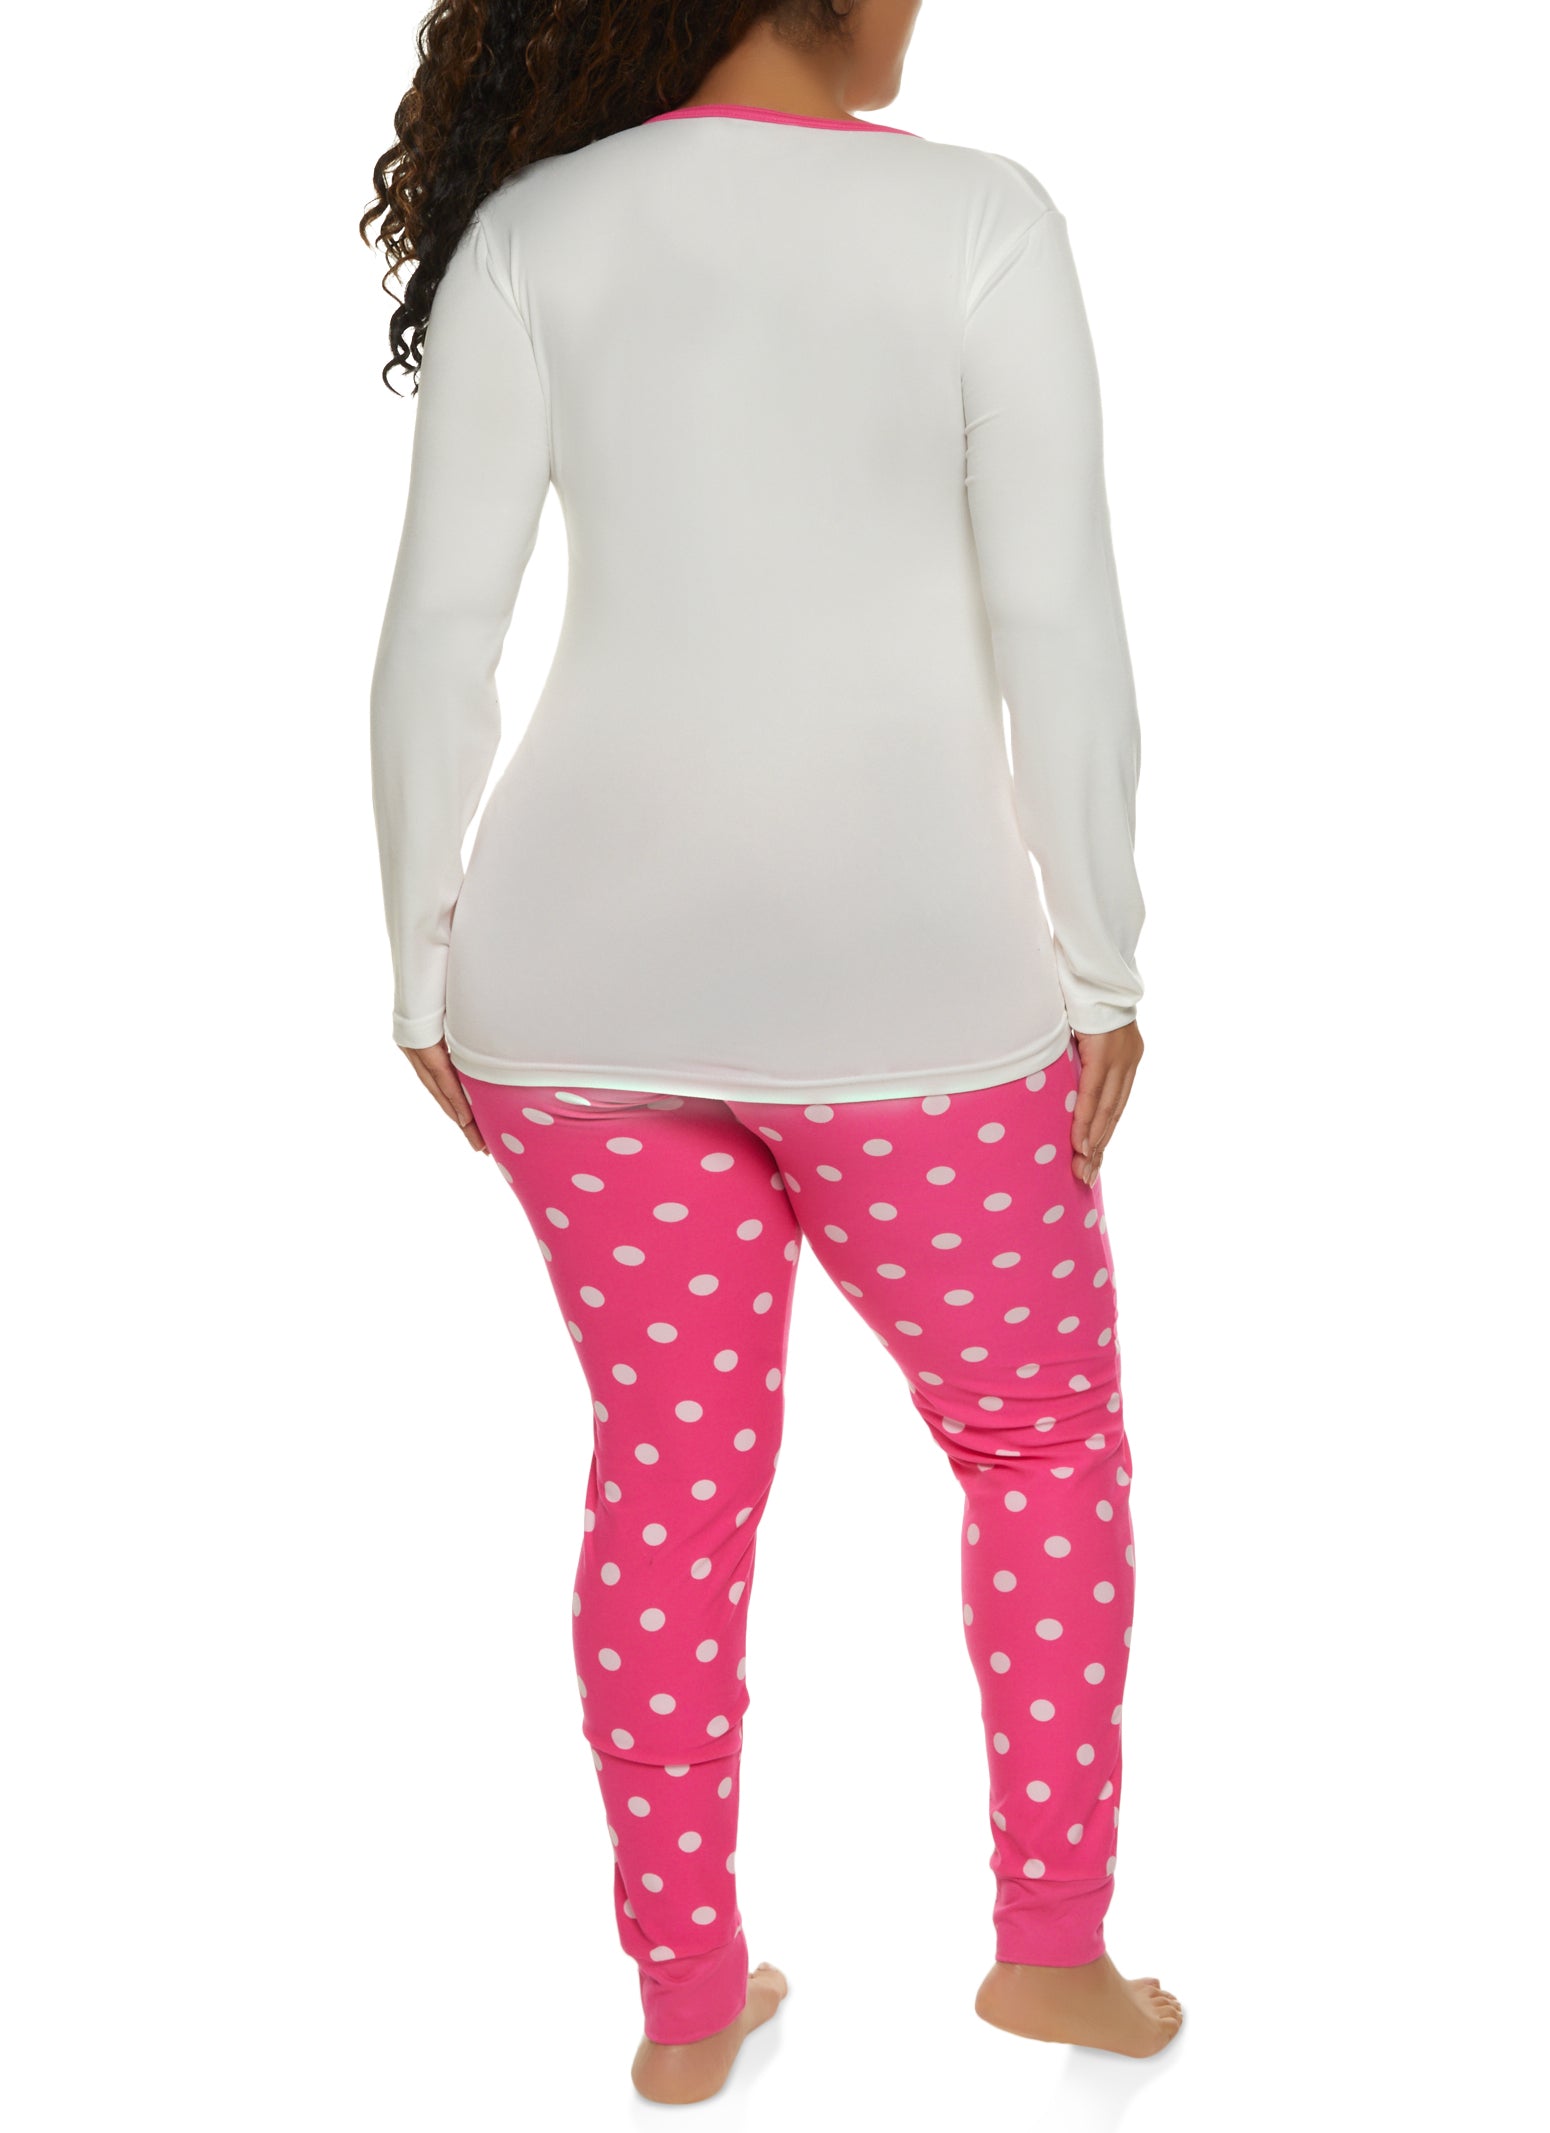 Rainbow Shops Womens Plus Size Just Hit The Snooze Button Pajama Top and  Polka Dot Pants, Pink, Size 3X